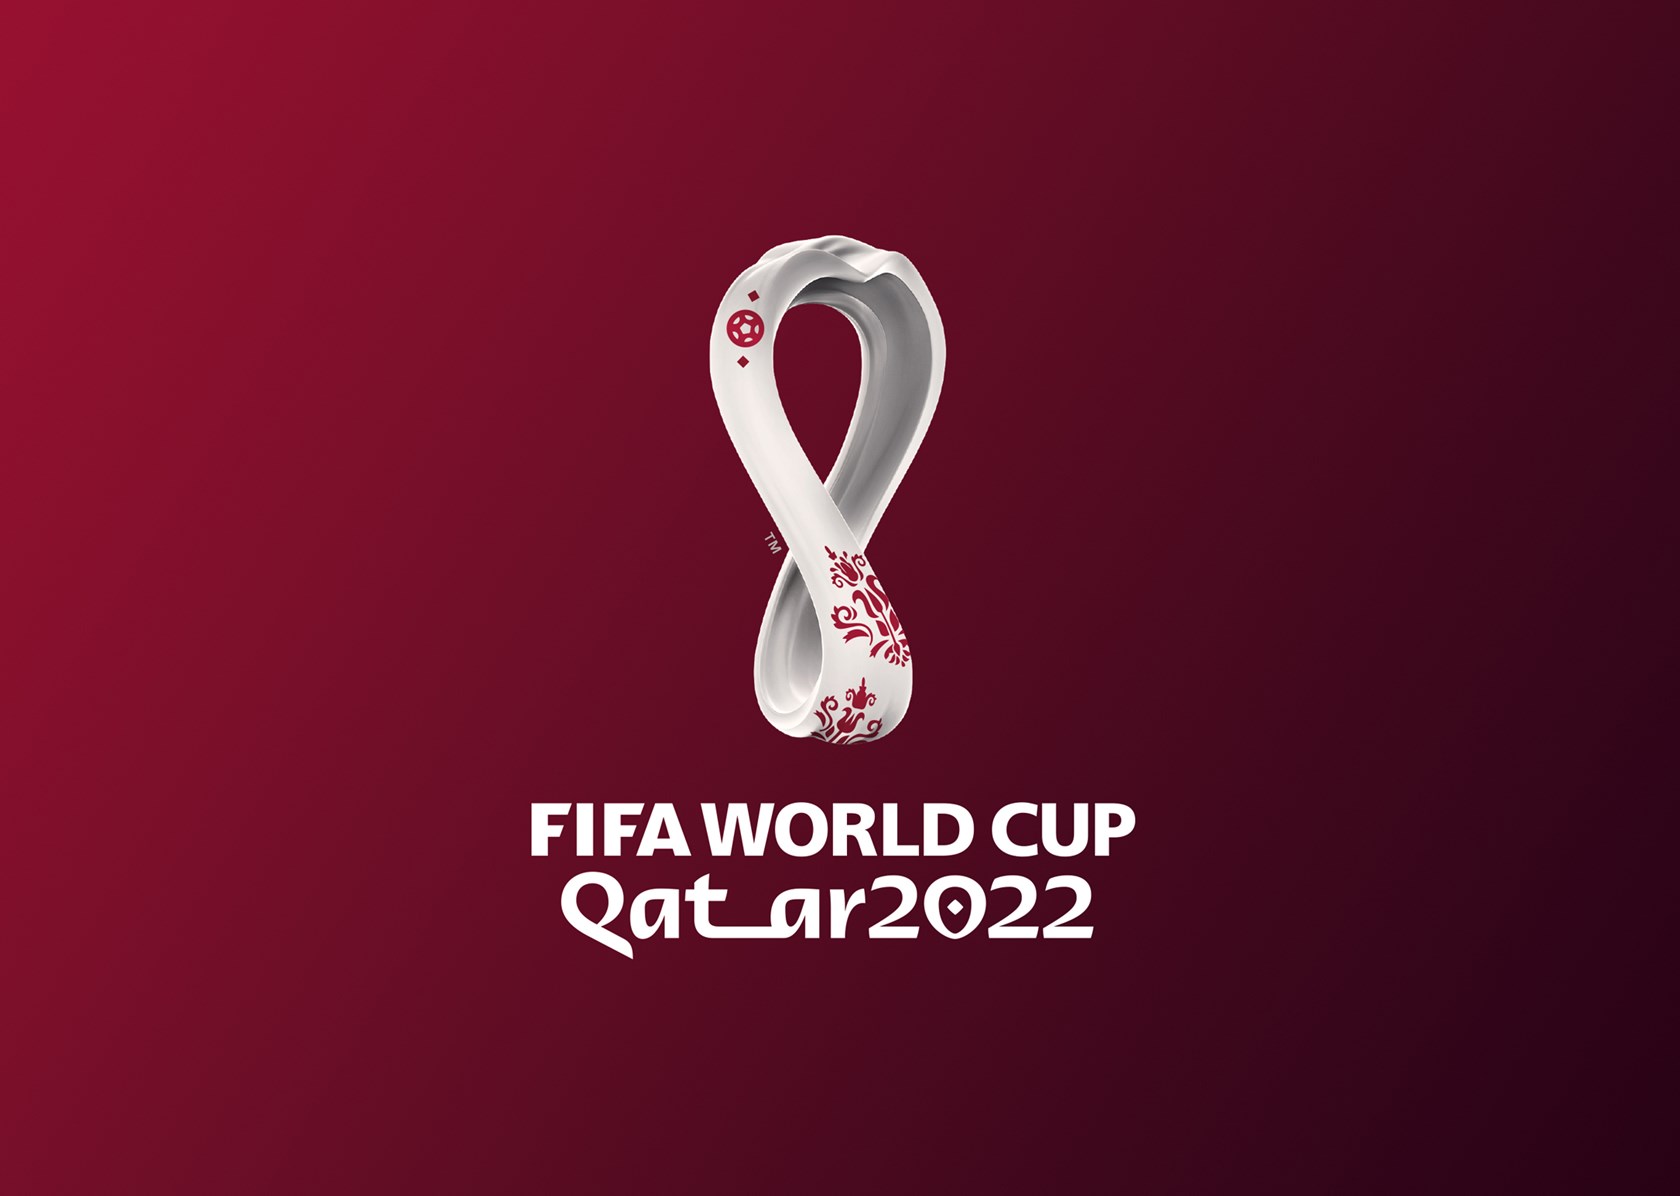 Ignite Media Group secures rights for 2022 FIFA World Cup